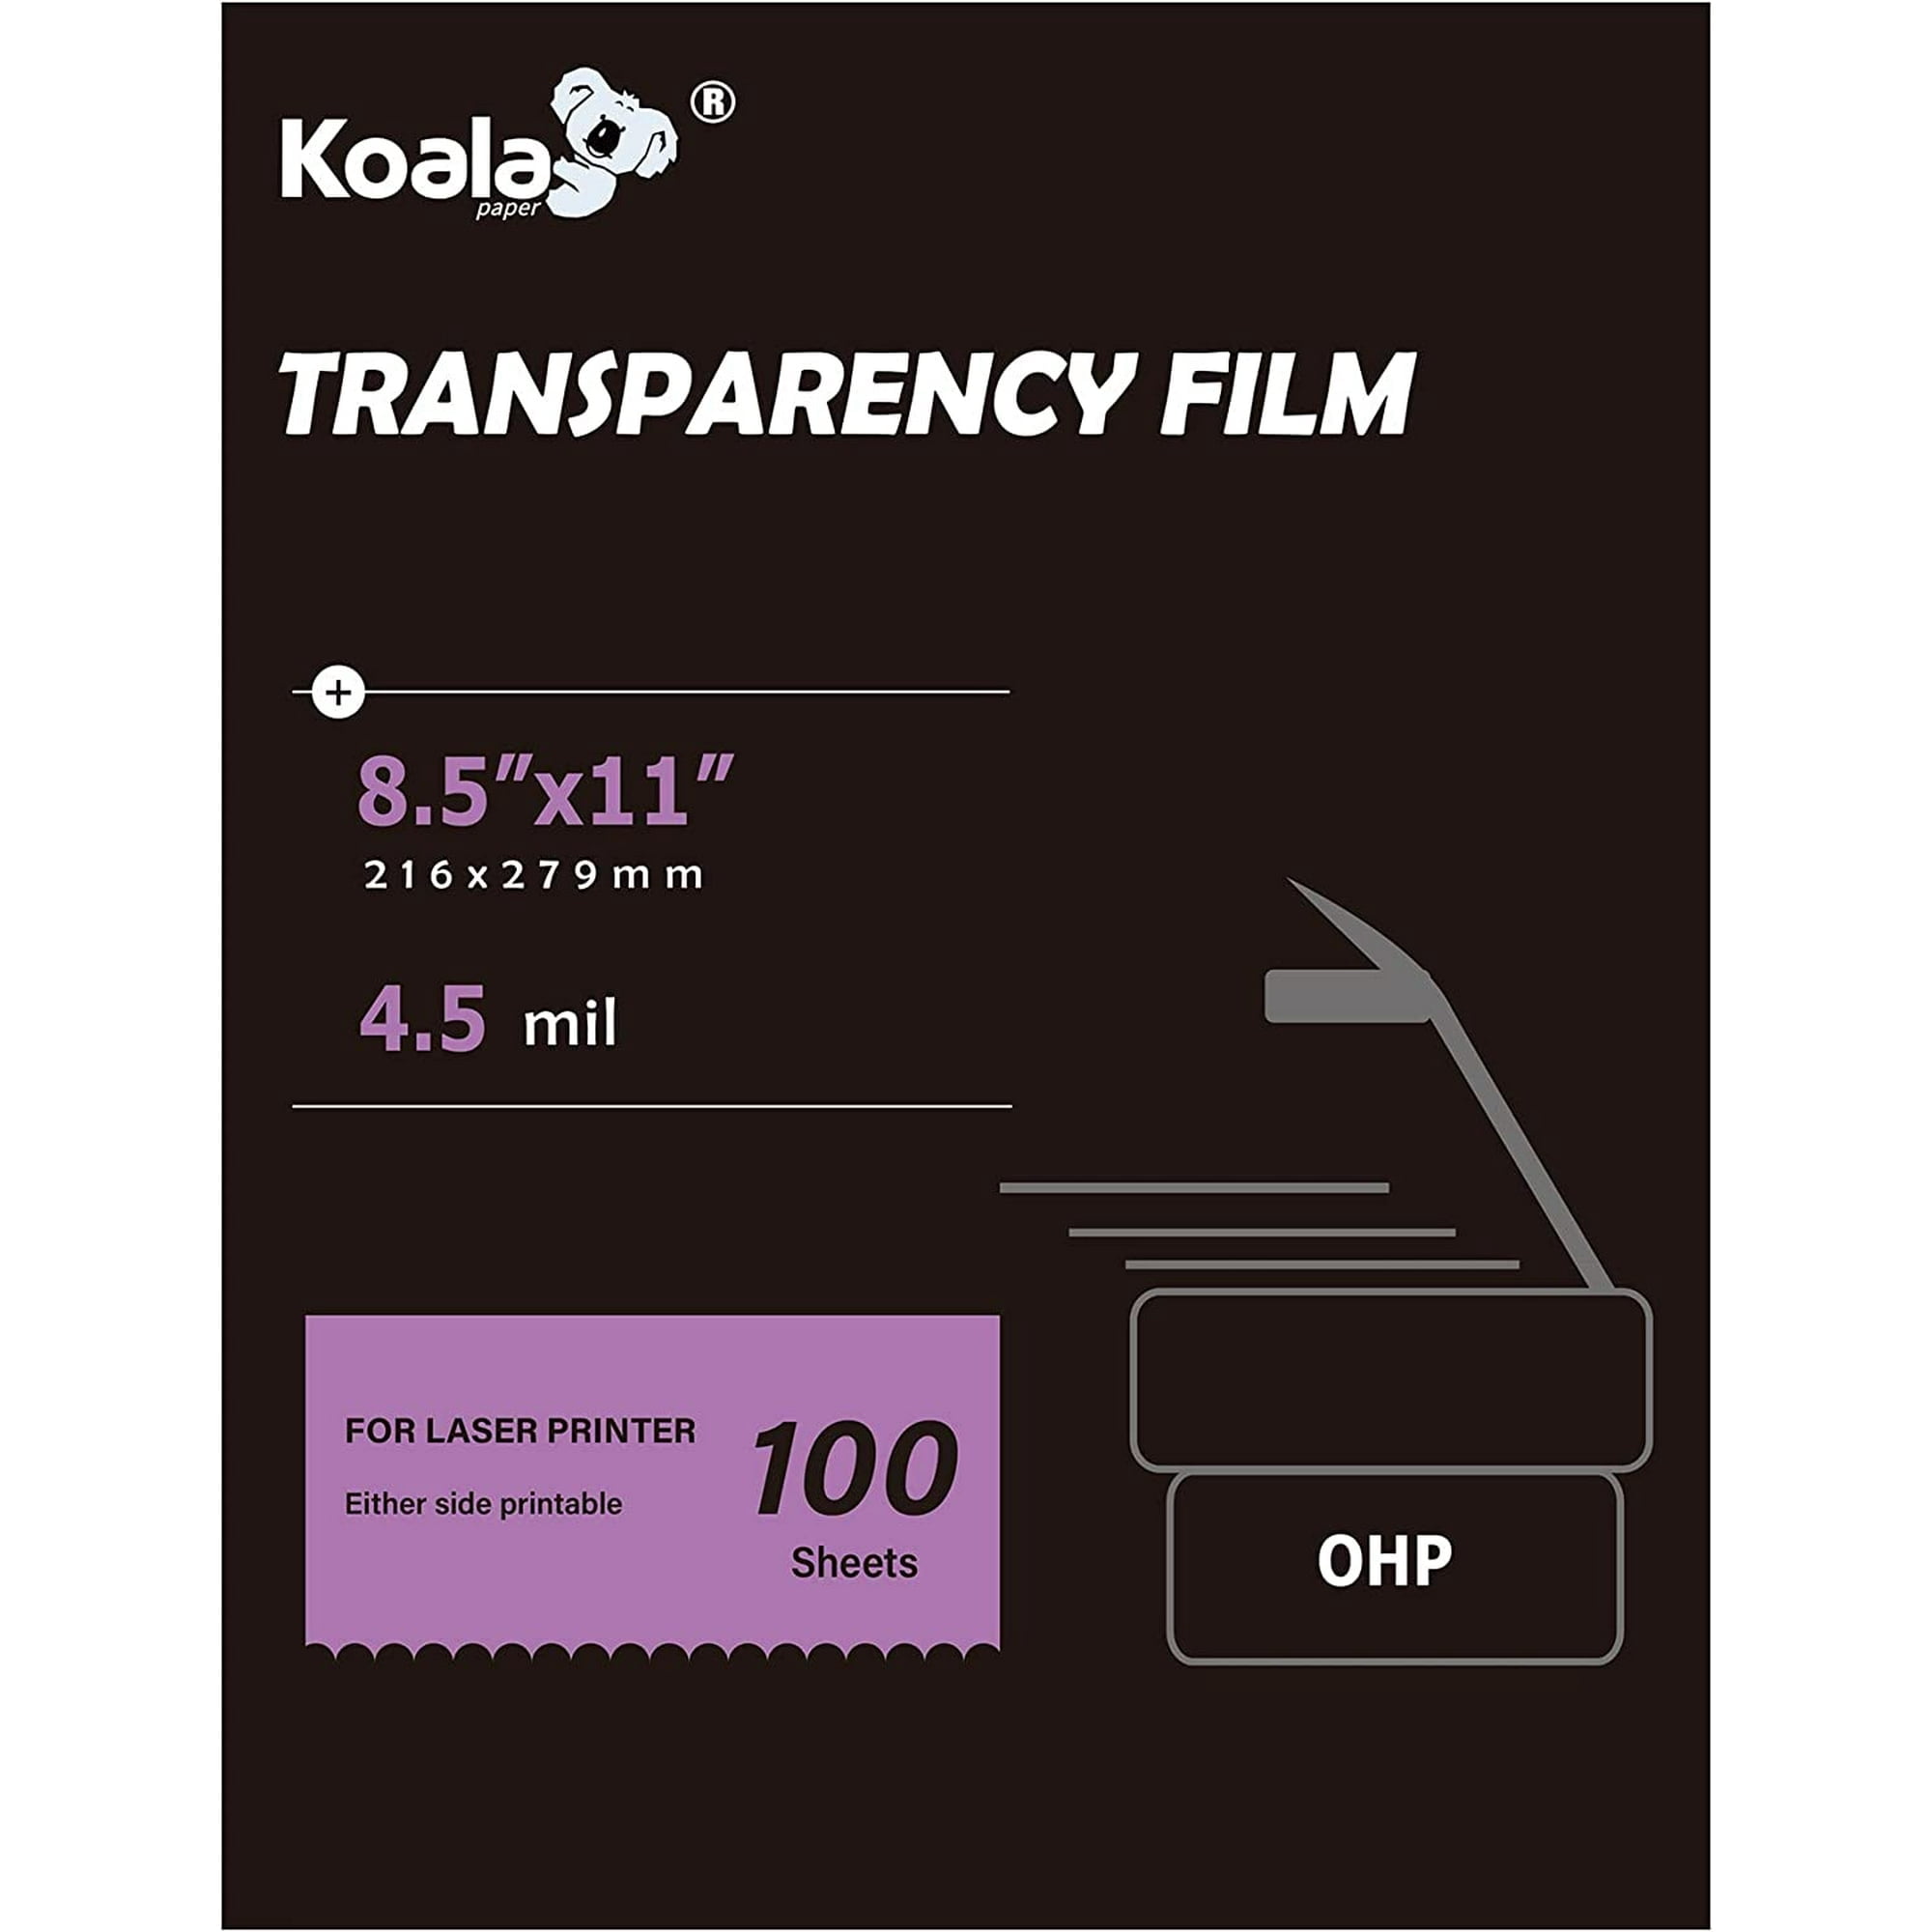 Koala Glossy White Film for Inkjet Printers, Waterproof and Tearproof Printer  Paper, Single-Sided Printable Film, 8.5 x 11 inch 20 Sheets, for  Exceptional Image Reproduction 